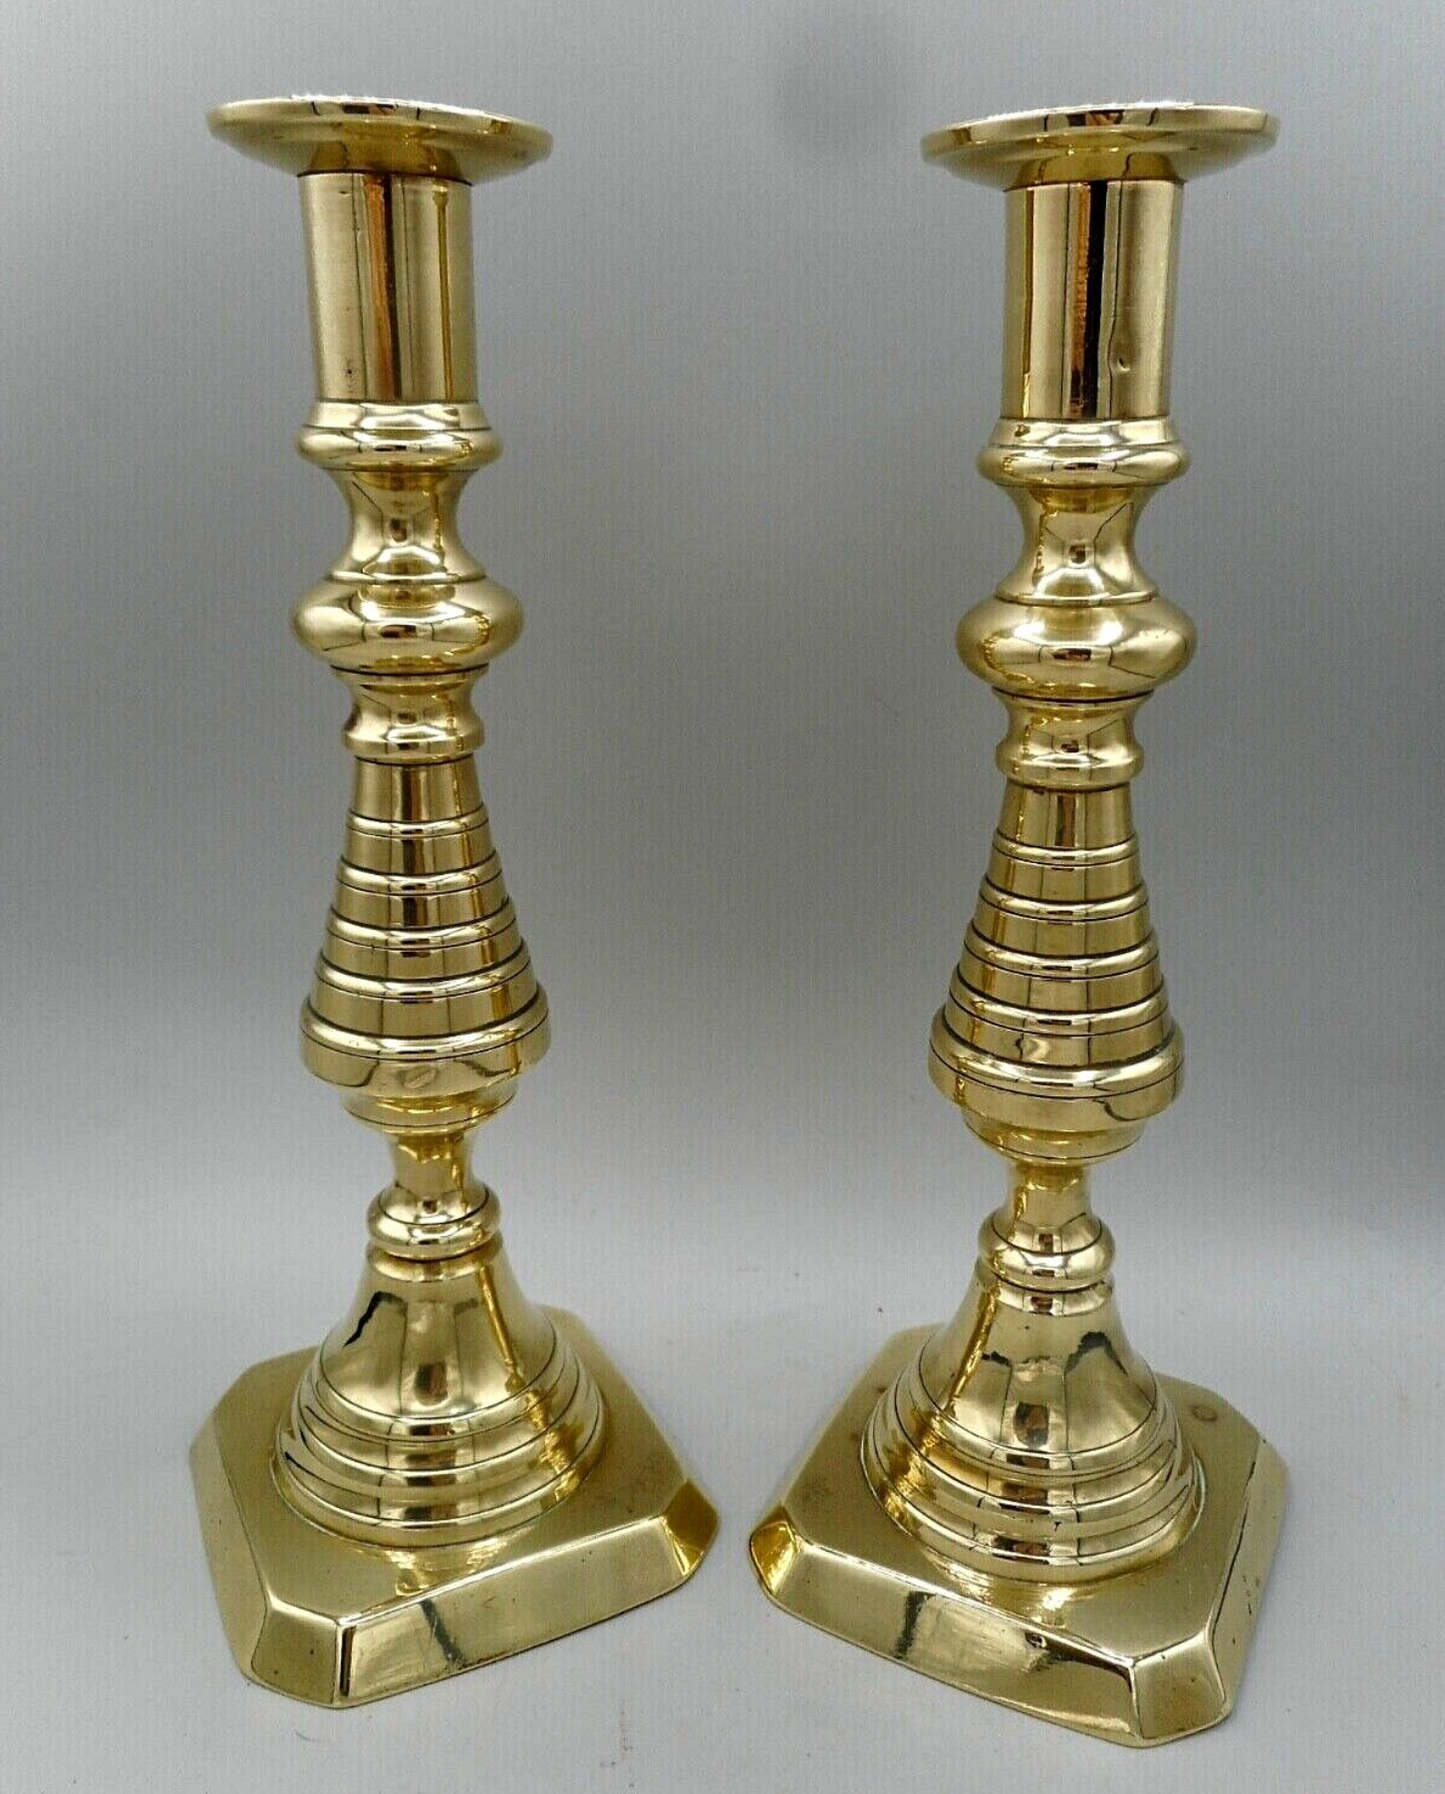 PAIR OF ANTIQUE SOLID BRASS CANDLESTICKS - BEEHIVE DESIGN